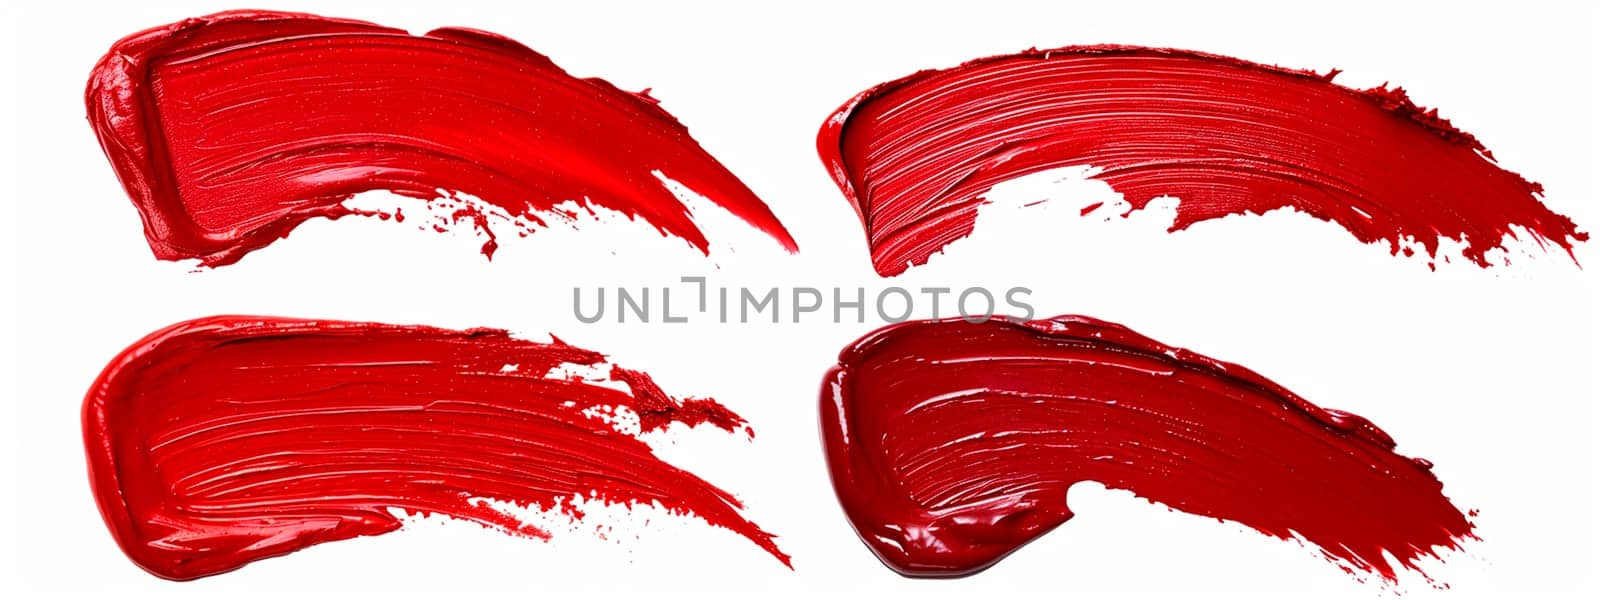 Lipstick strokes isolate on a white background. Selective focus. cosmetic.